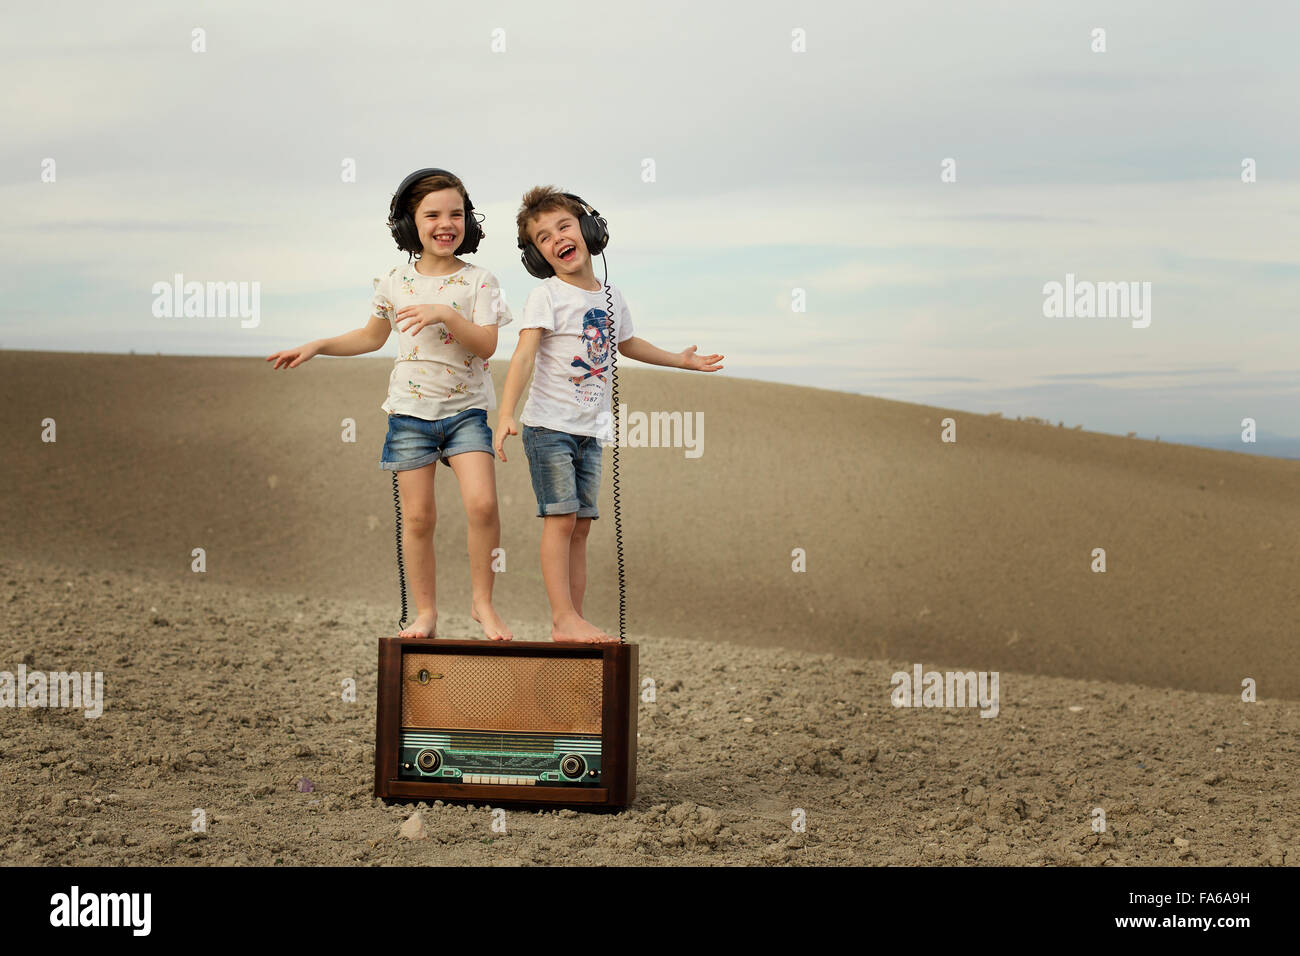 Boy and girl dancing on a old abandoned radio Stock Photo